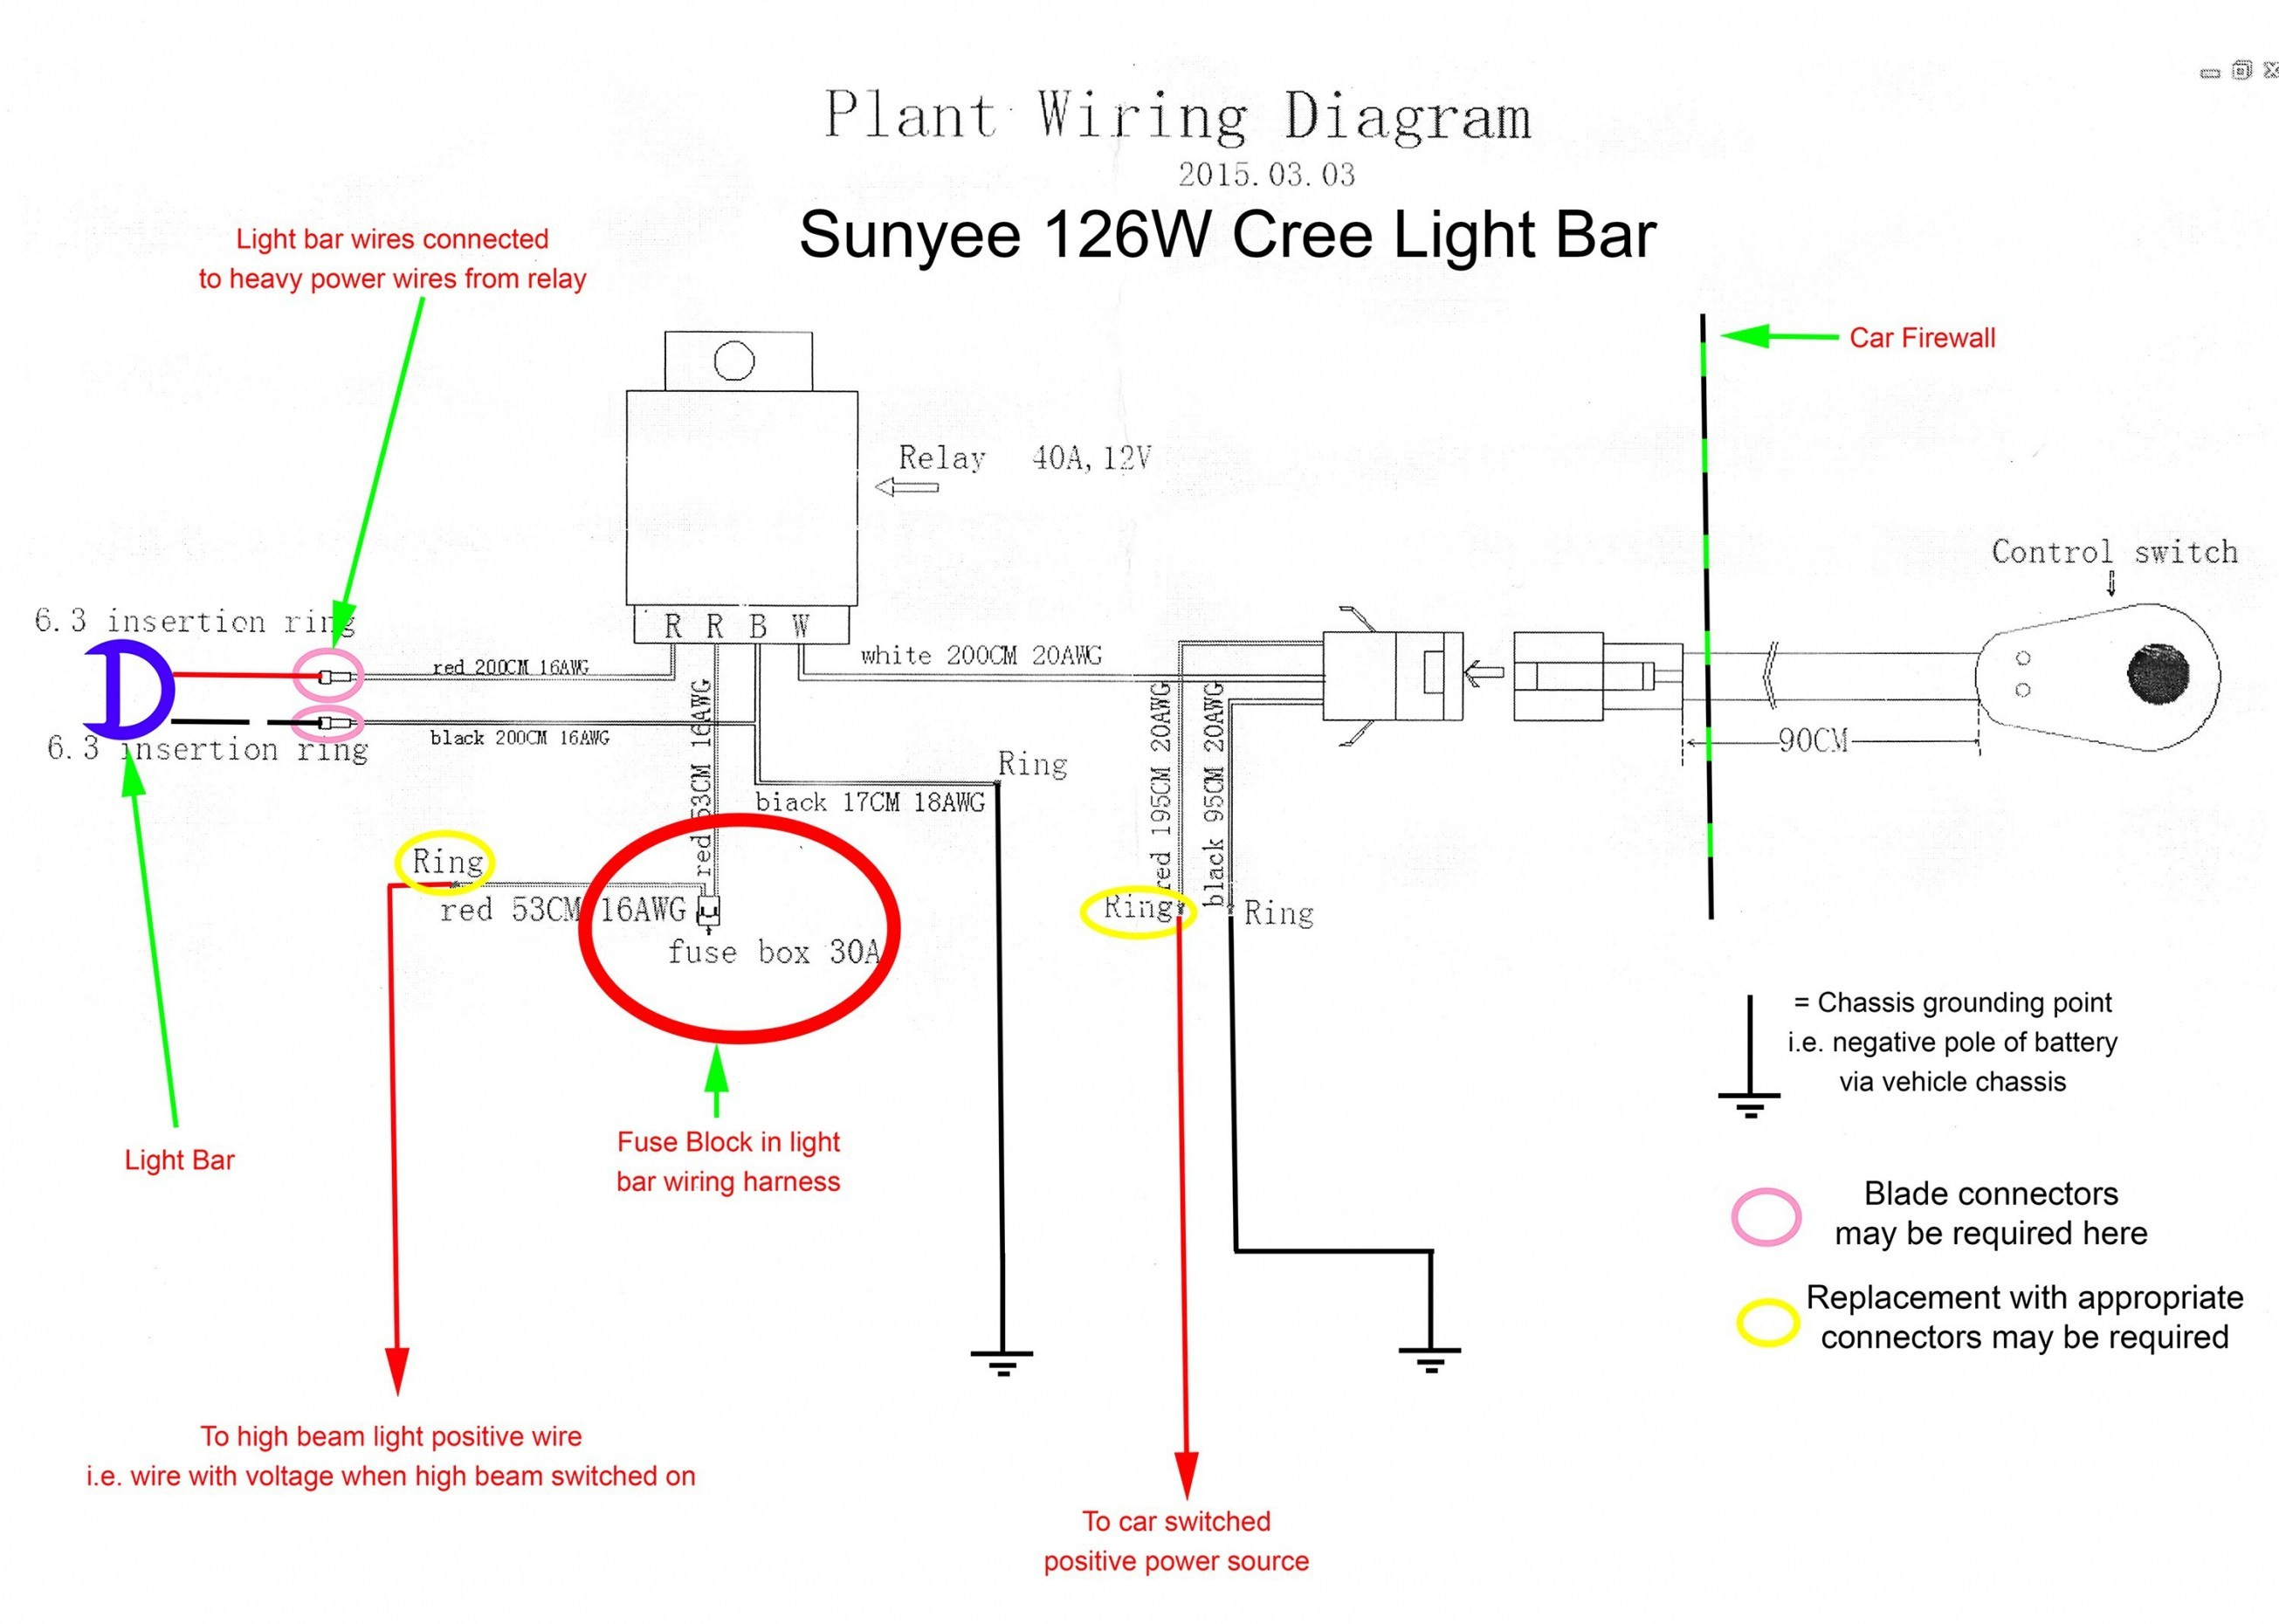 3 Wire Connection Diagram | Wiring Library - Christmas Lights Wiring Diagram